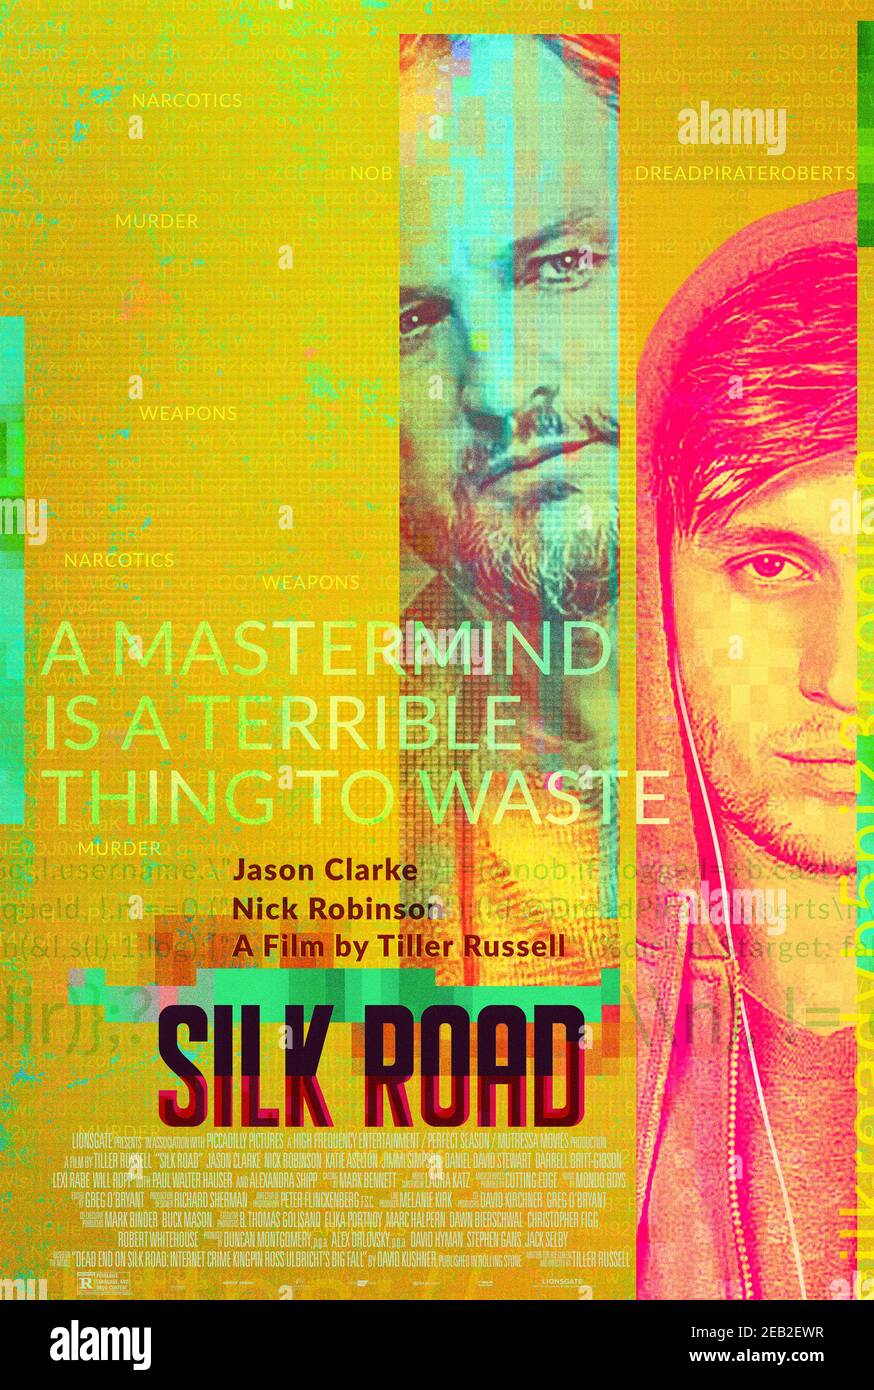 RELEASE DATE: February 19, 2021 TITLE: Silk Road STUDIO: Lionsgate DIRECTOR: Tiller Russell PLOT: Philosophical twenty-something Ross Ulbricht creates Silk Road, a dark net website that sells narcotics, while DEA agent Rick Bowden goes undercover to bring him down. STARRING: JASON CLARKE as Rick Bowden, NICK ROBINSON as Ross Ulbricht. (Credit Image: © Lionsgate/Entertainment Pictures) Stock Photo